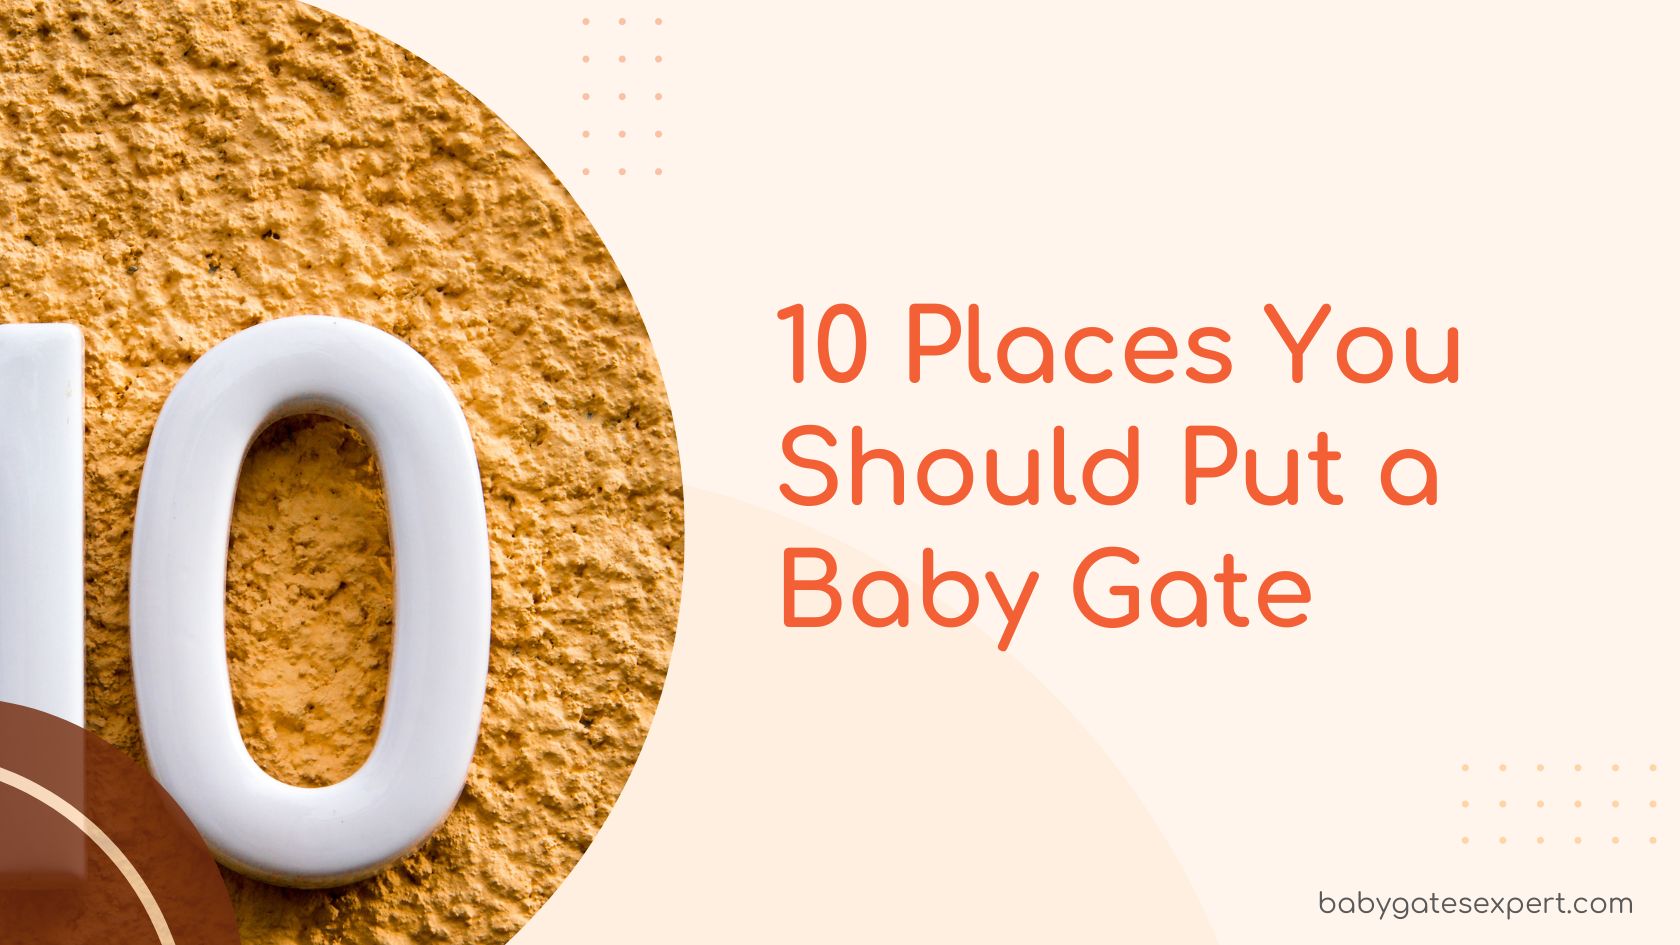 10 Places You Should Put a Baby Gate